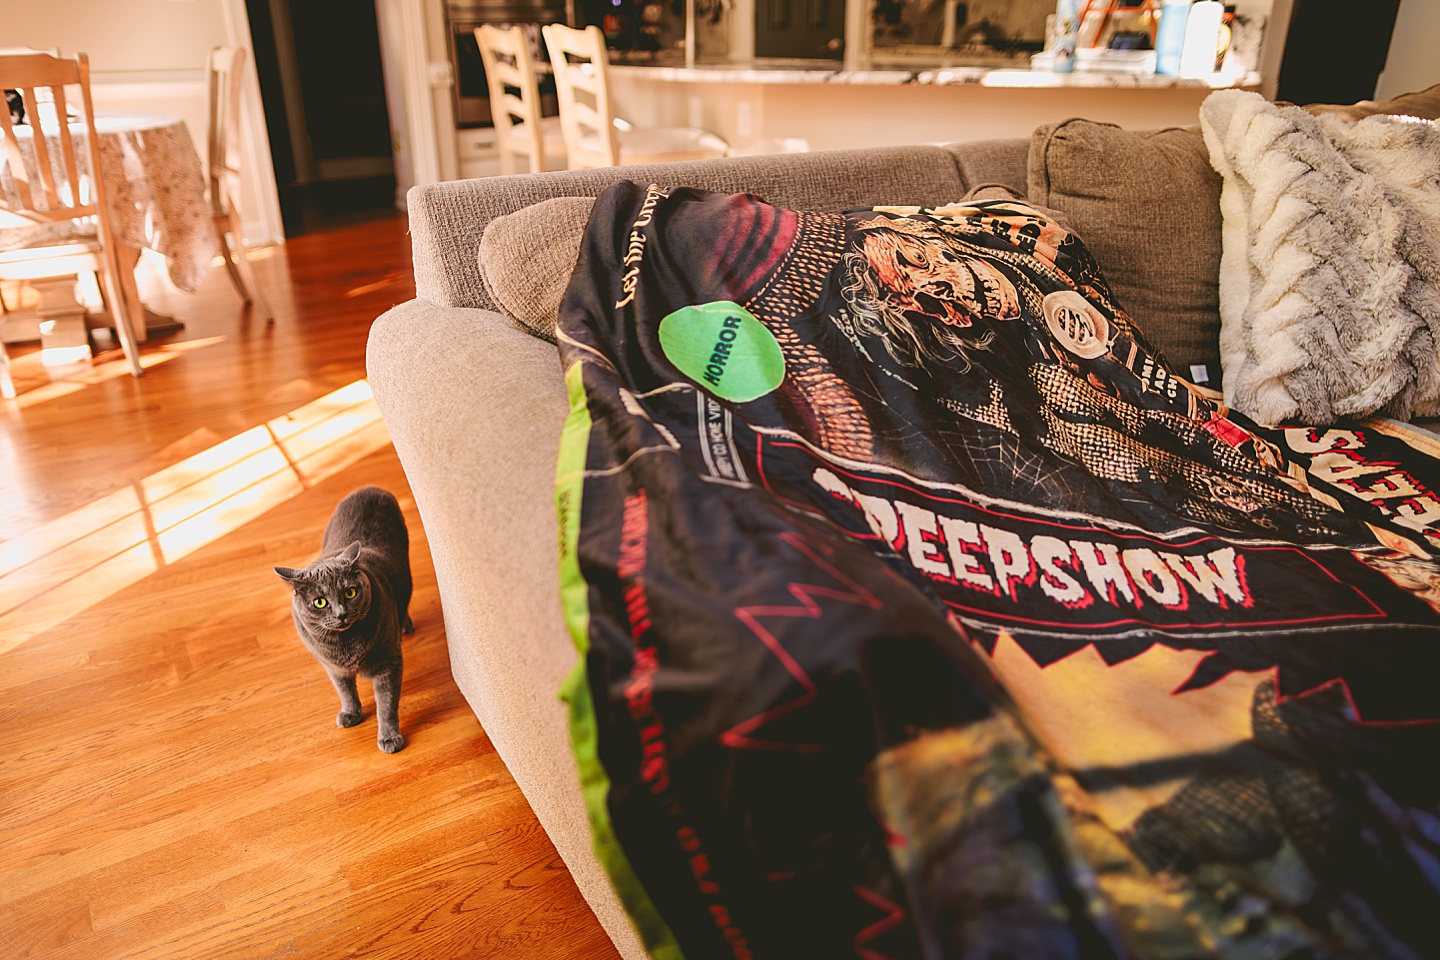 Cat walking past couch with a Creepshow blanket on it